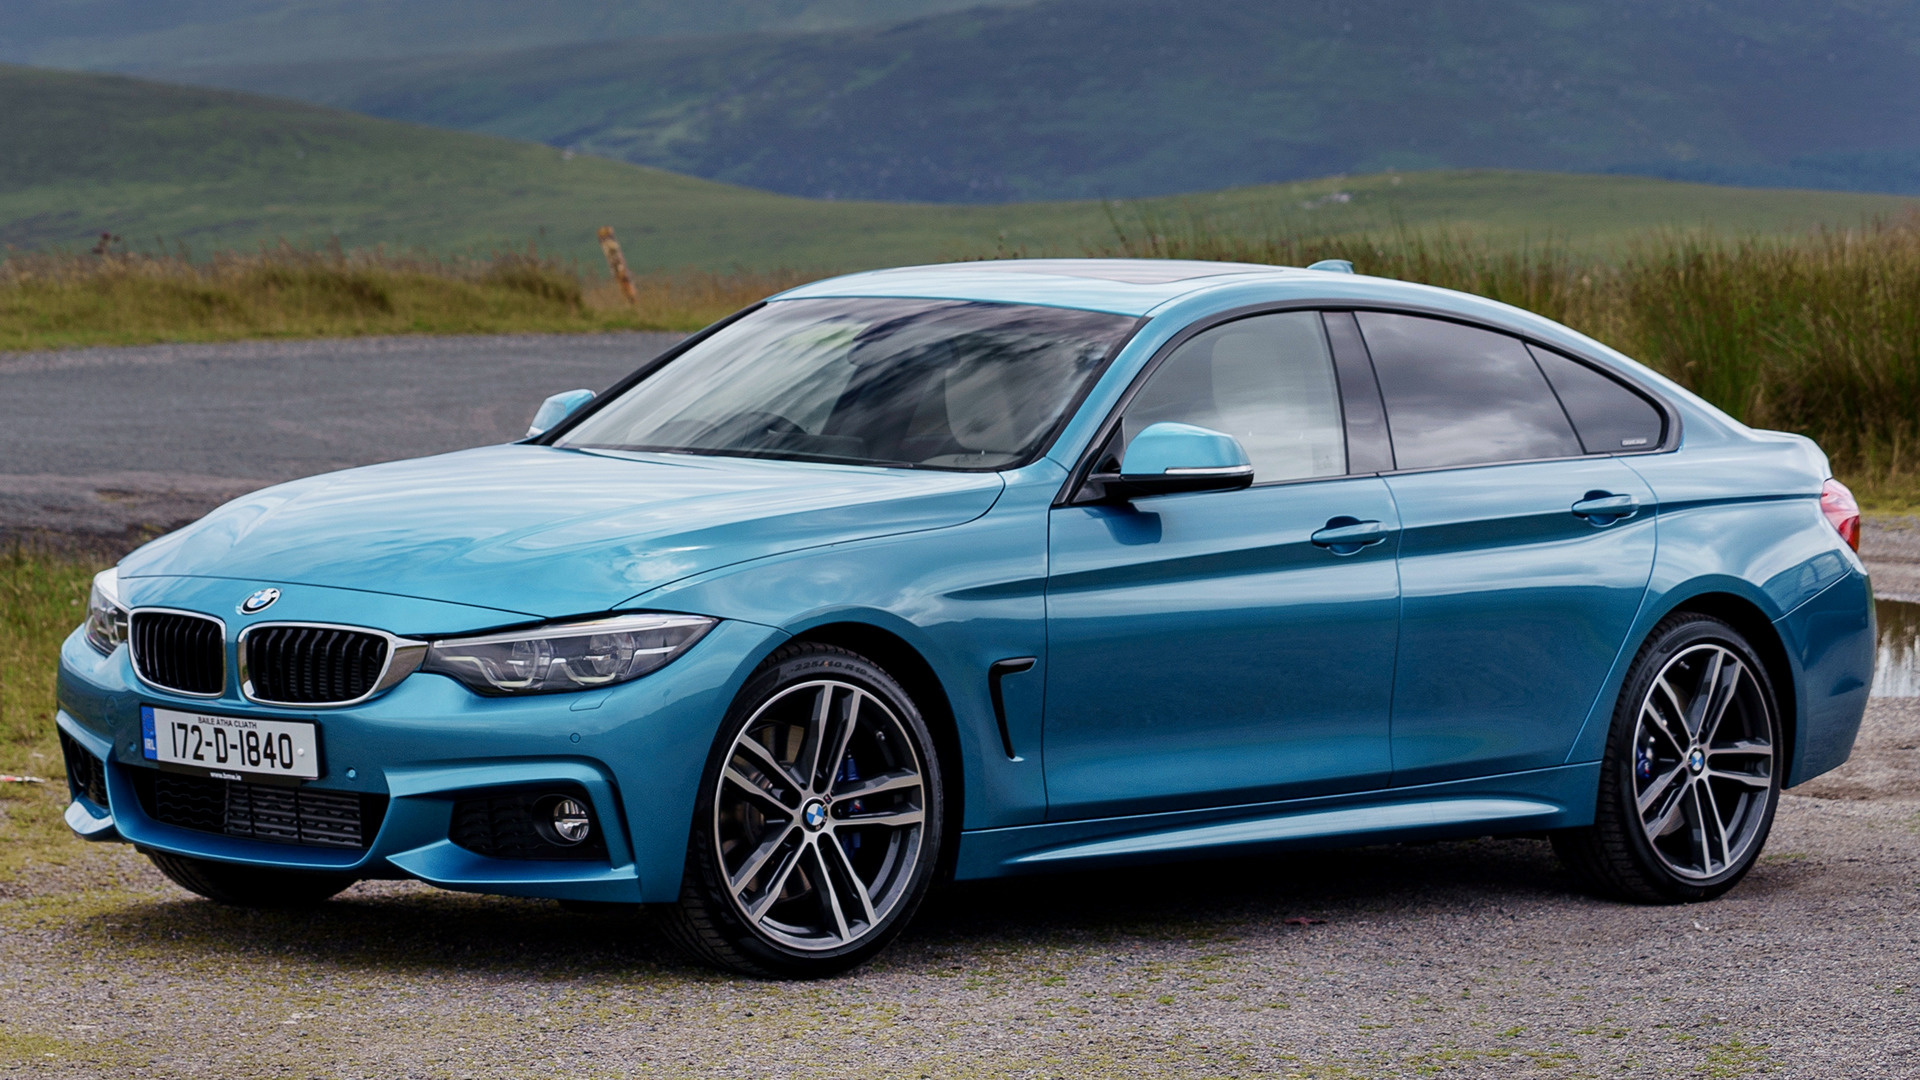 2017 BMW 4 Series Gran Coupe M Sport (UK) - Wallpapers and HD Images